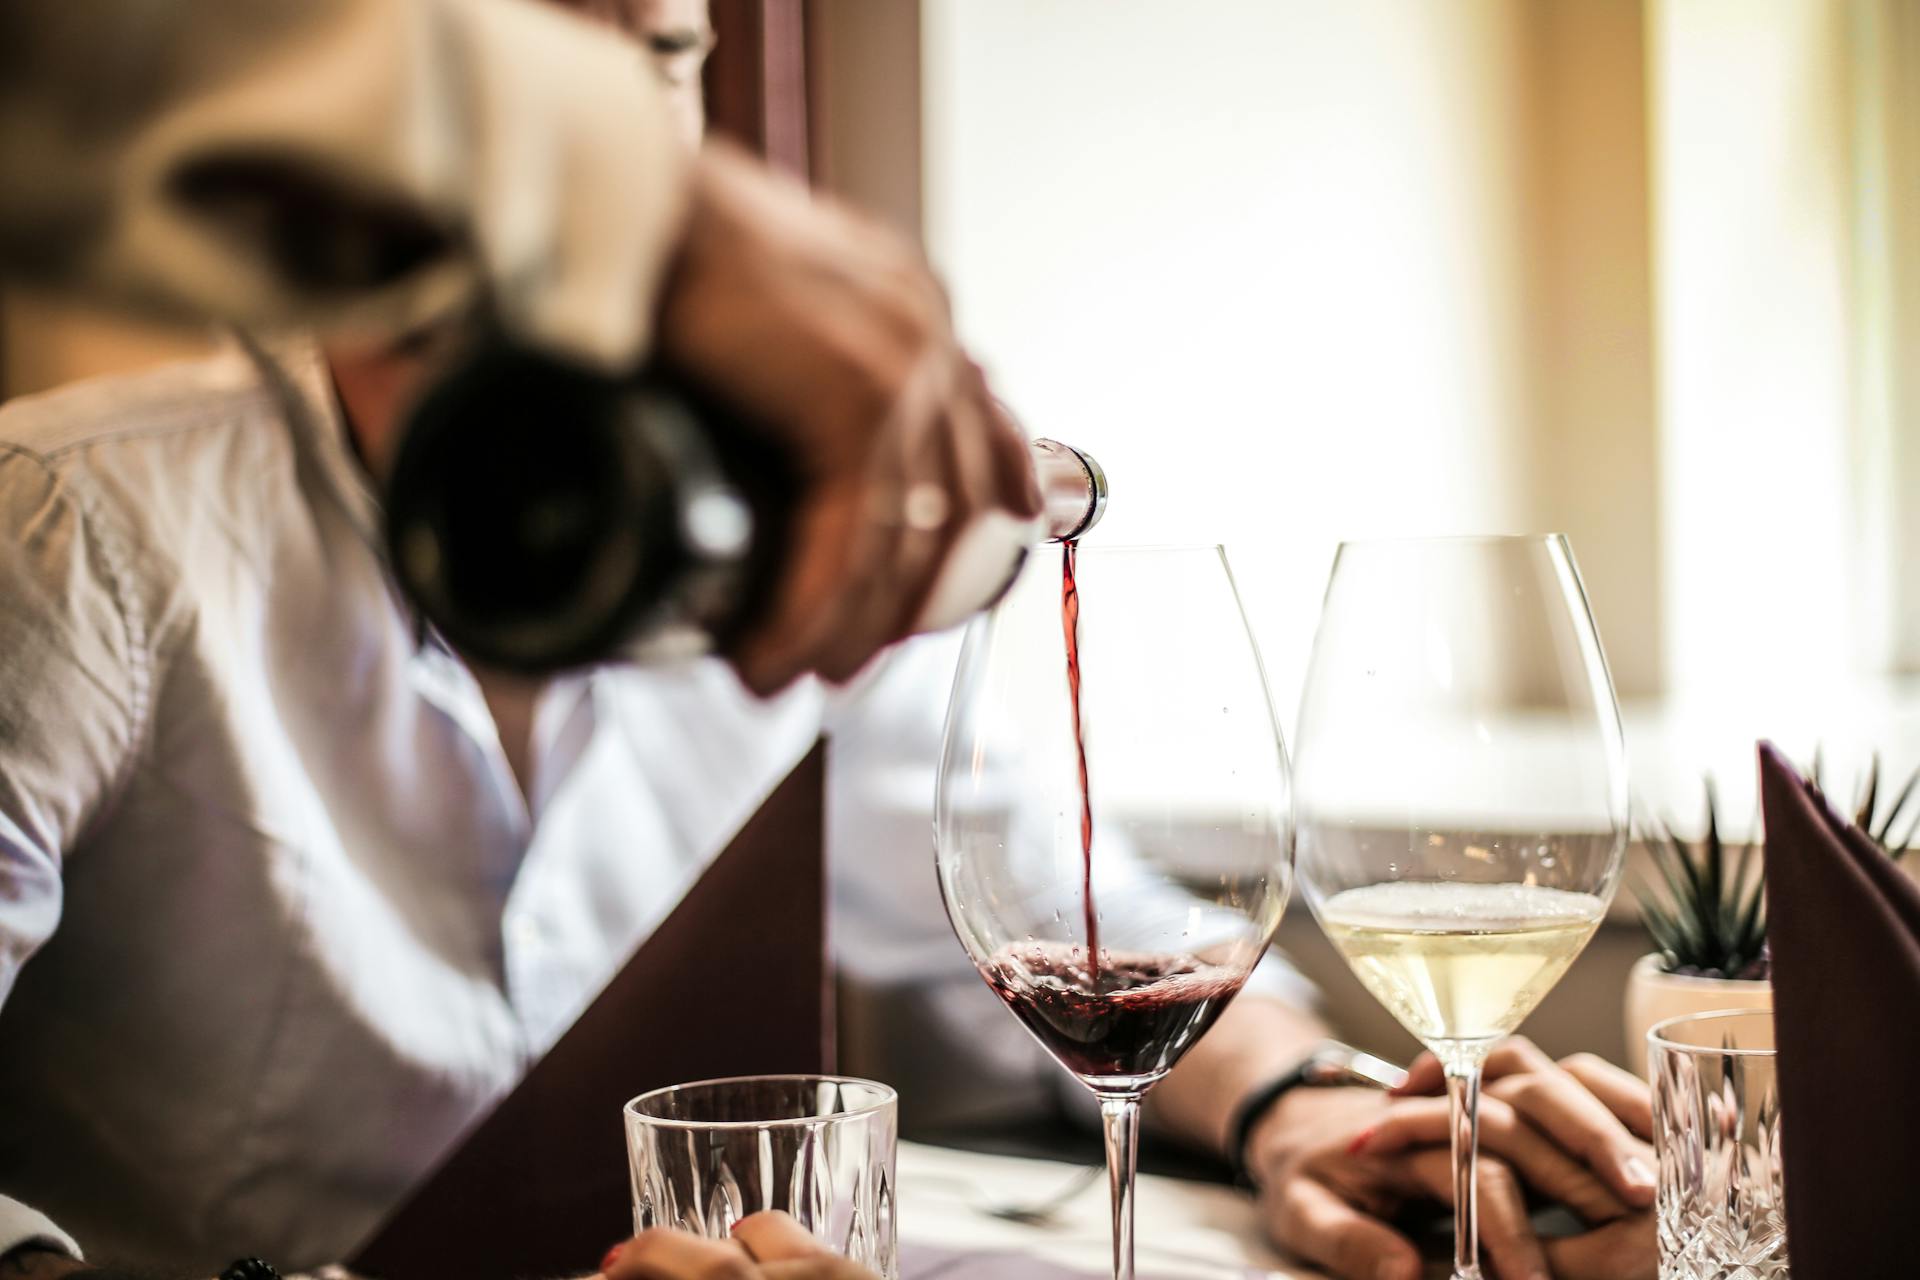 A person pouring wine at a restaurant | Source: Pexels